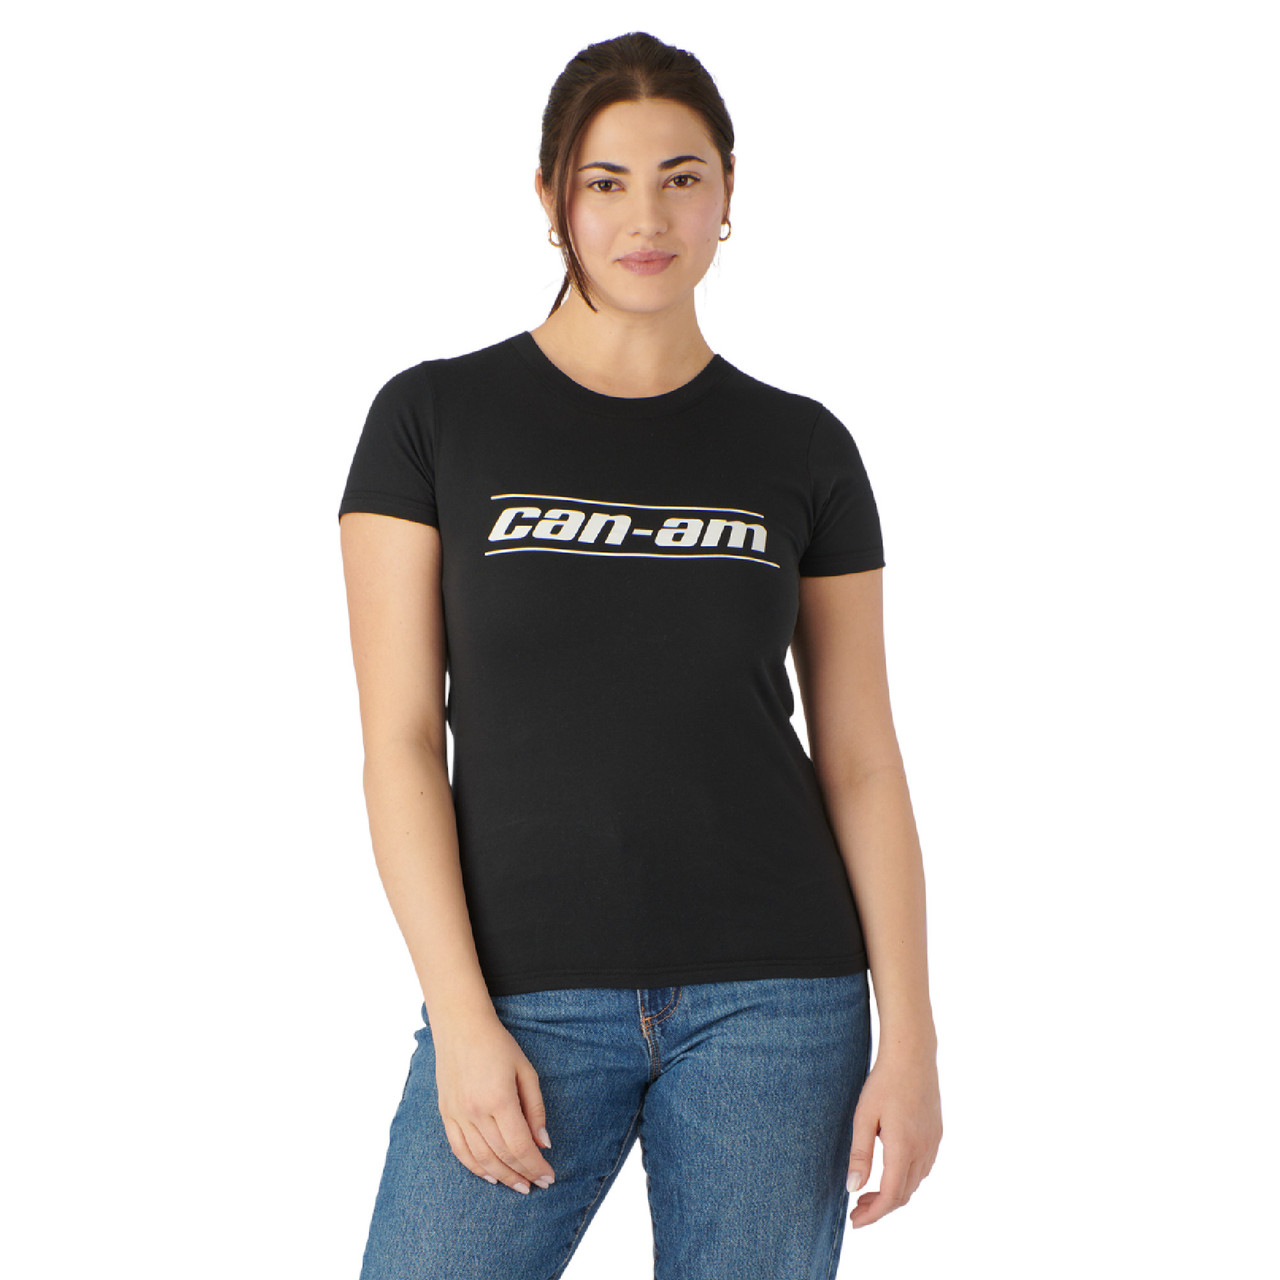 Can-Am New OEM, Women's Small Cotton Polyester Signature T-shirt, 4547530490